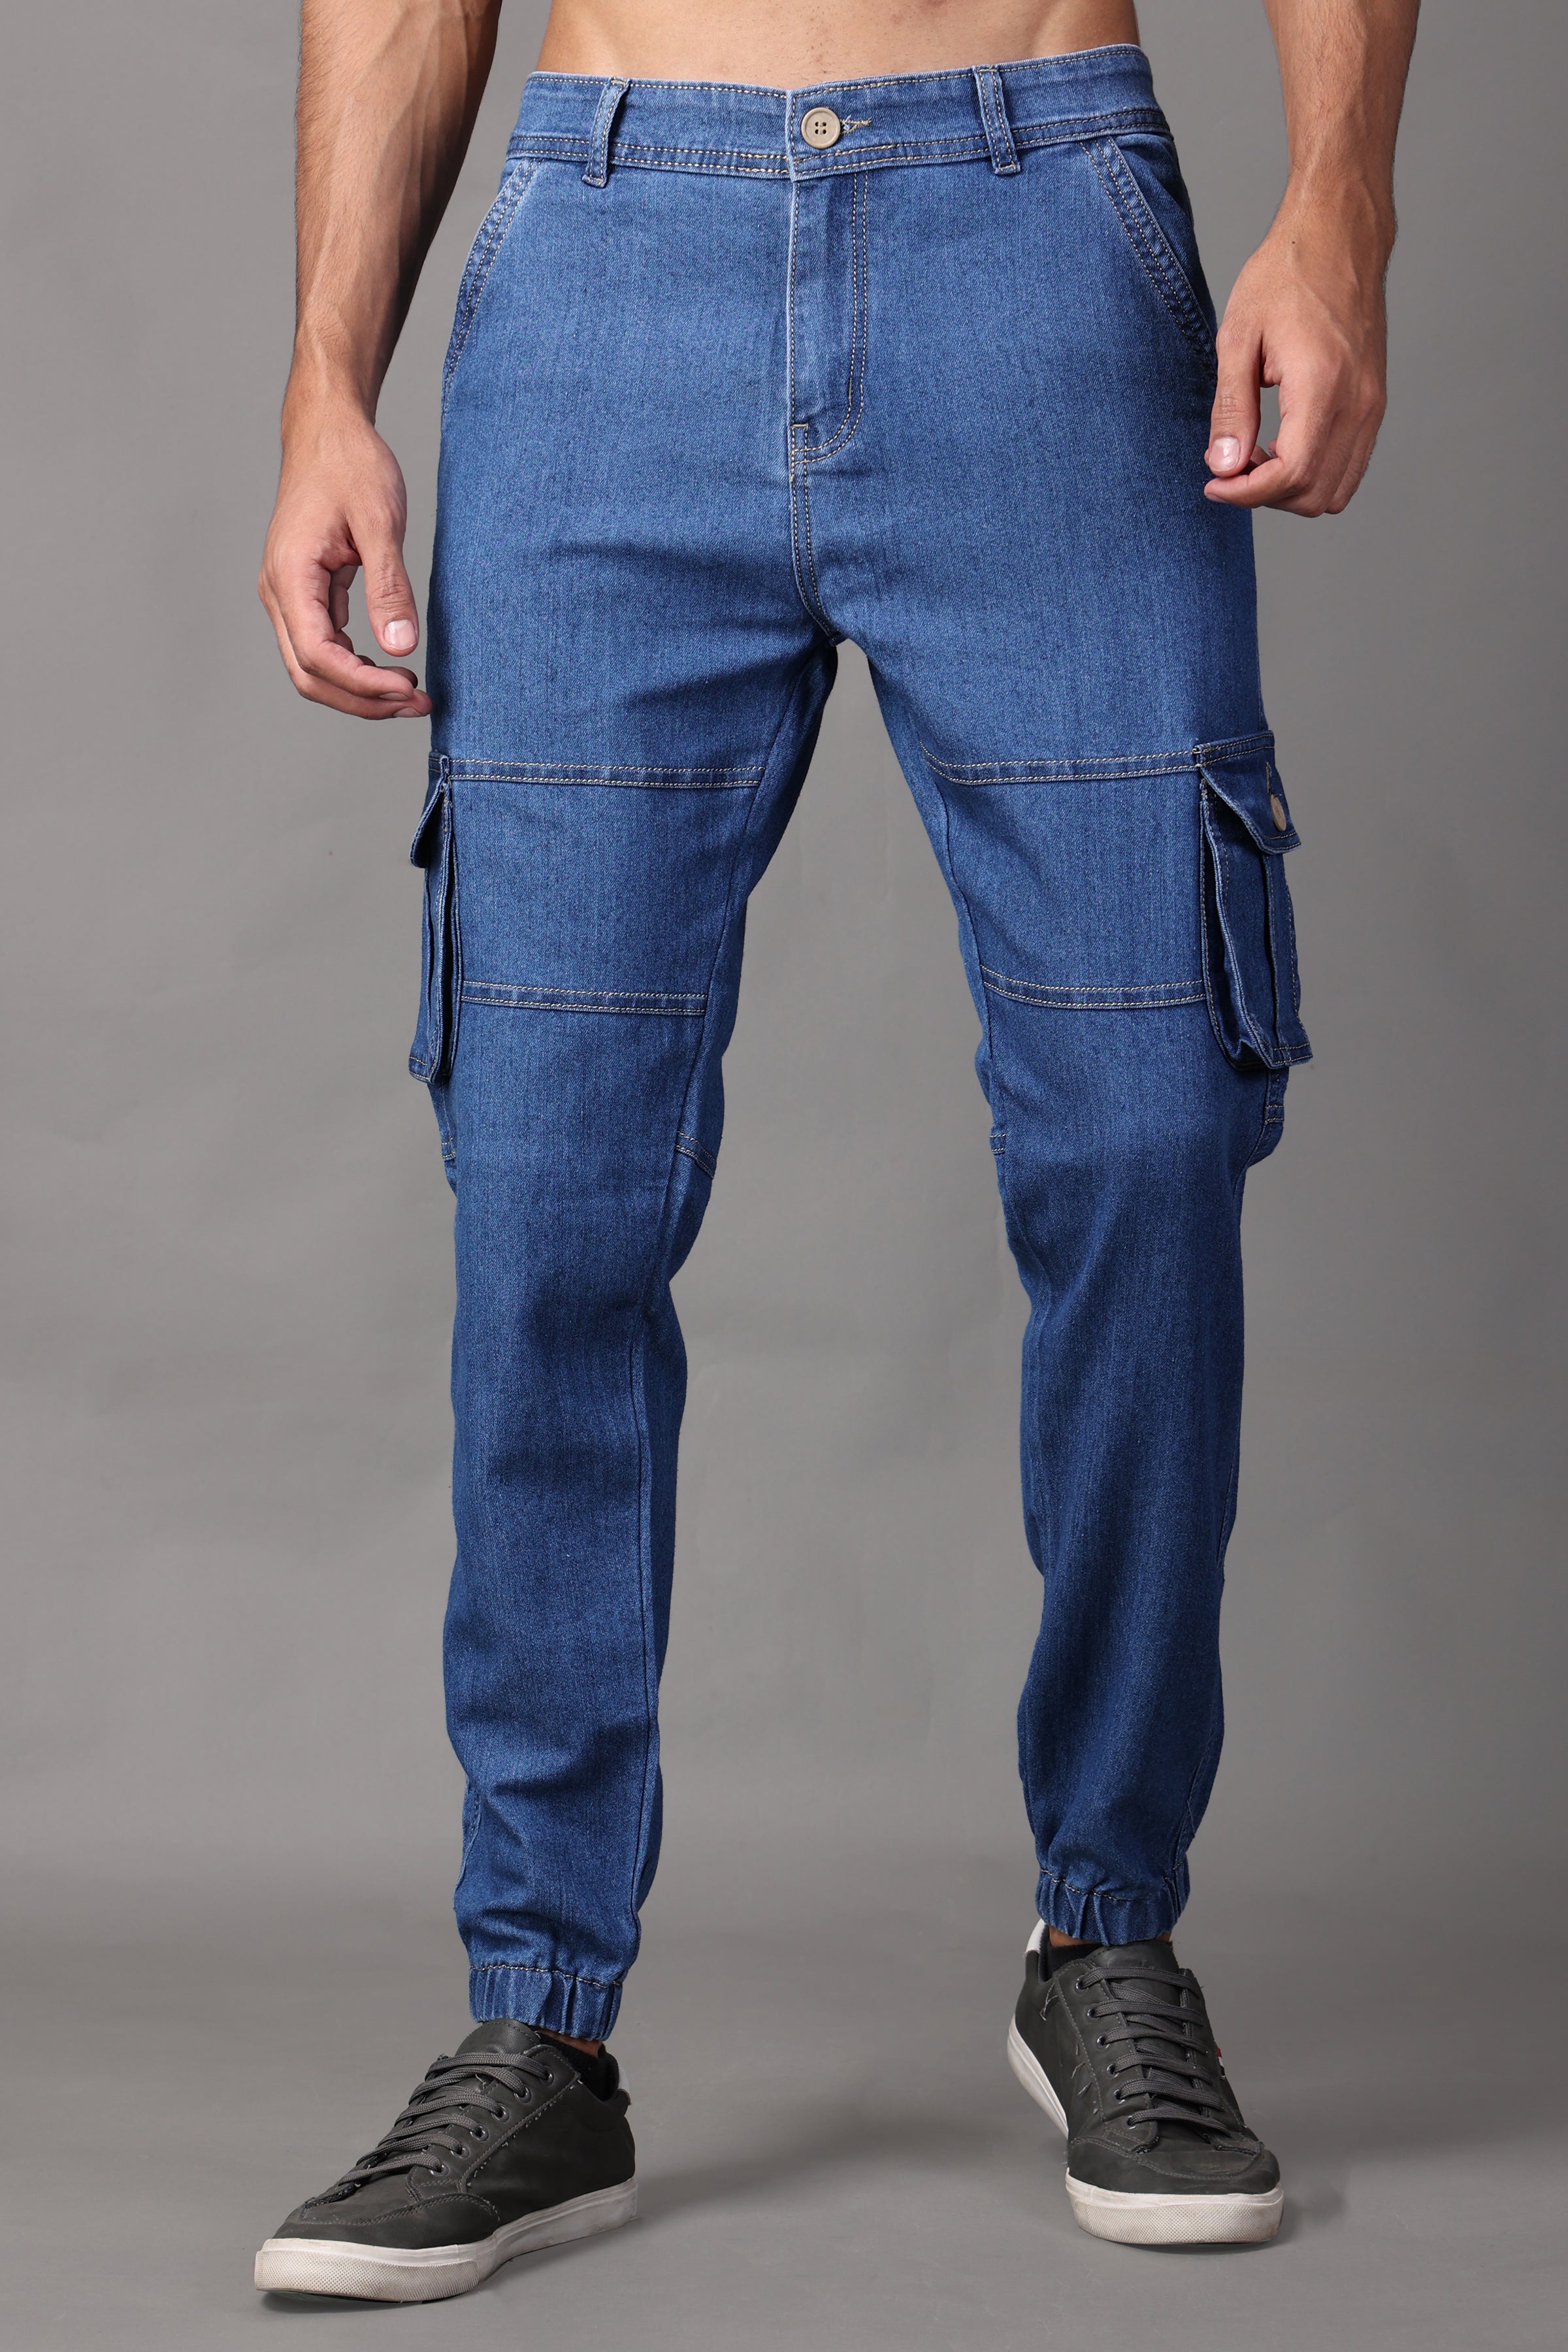 Buy Ultimate Cargo Denim Jeans Men's Jeans & Pants from Buyers Picks. Find  Buyers Picks fashion & more at DrJays.com